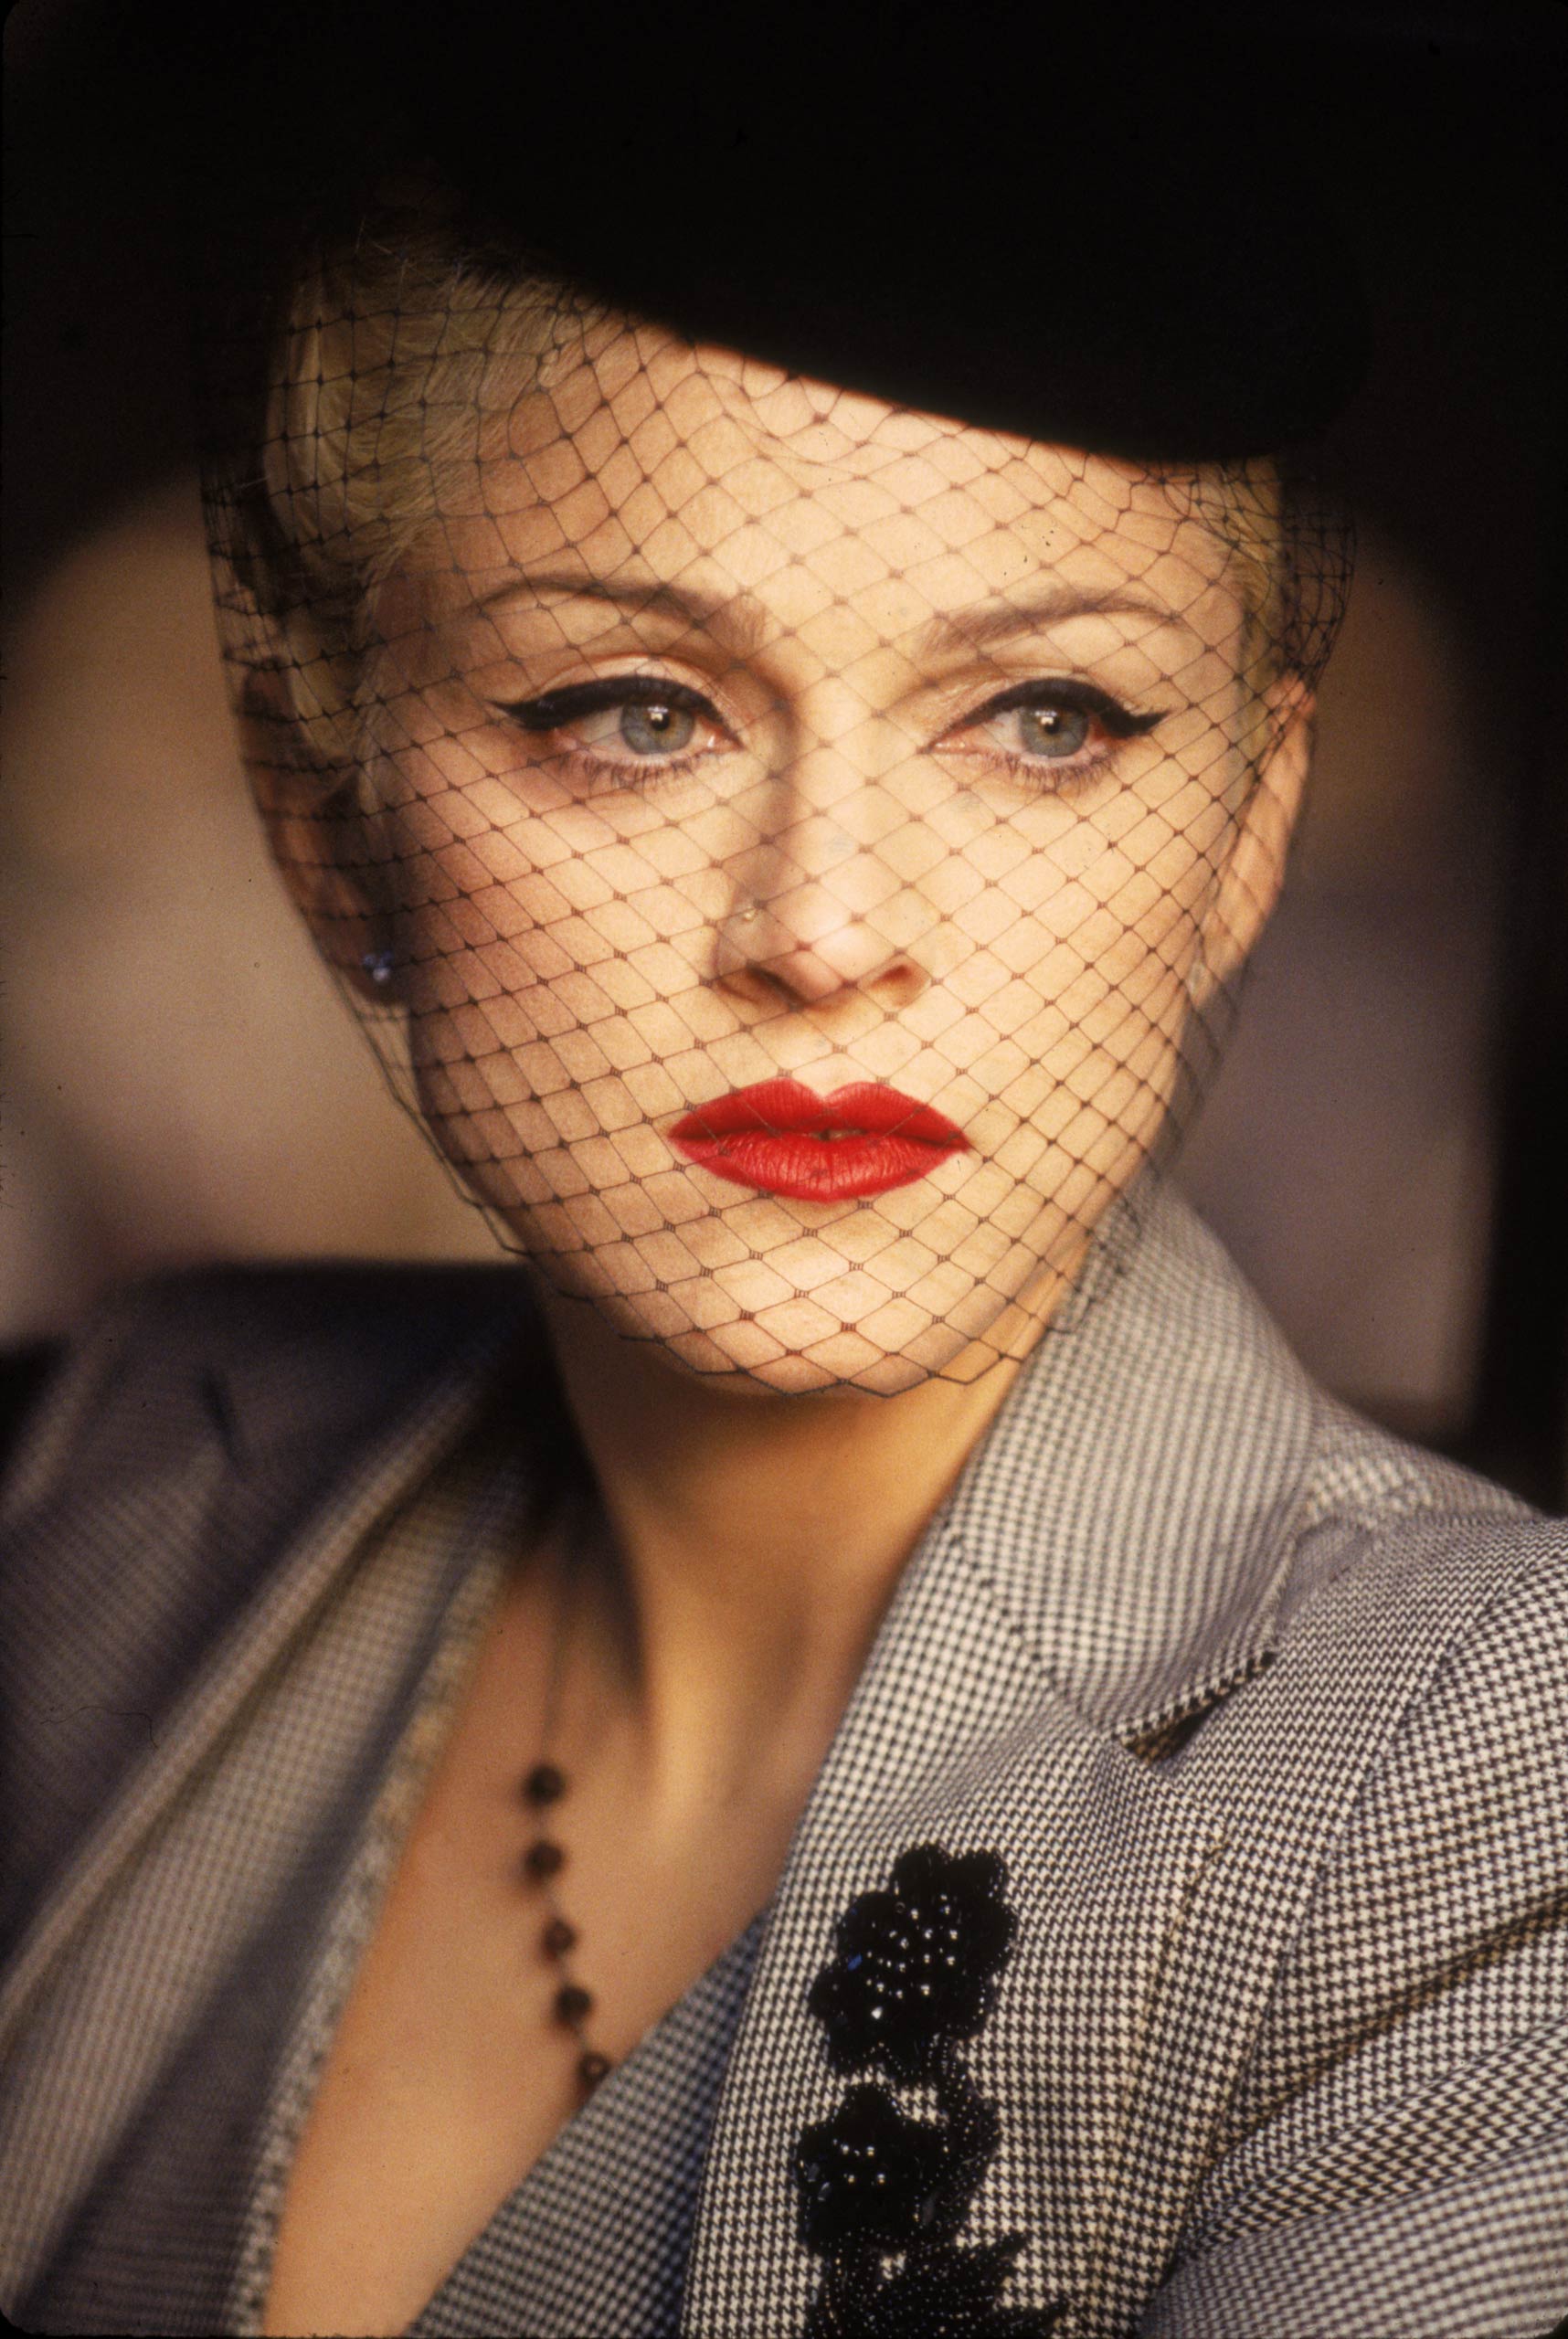 Madonna During 'Take A Bow' Video Shoot